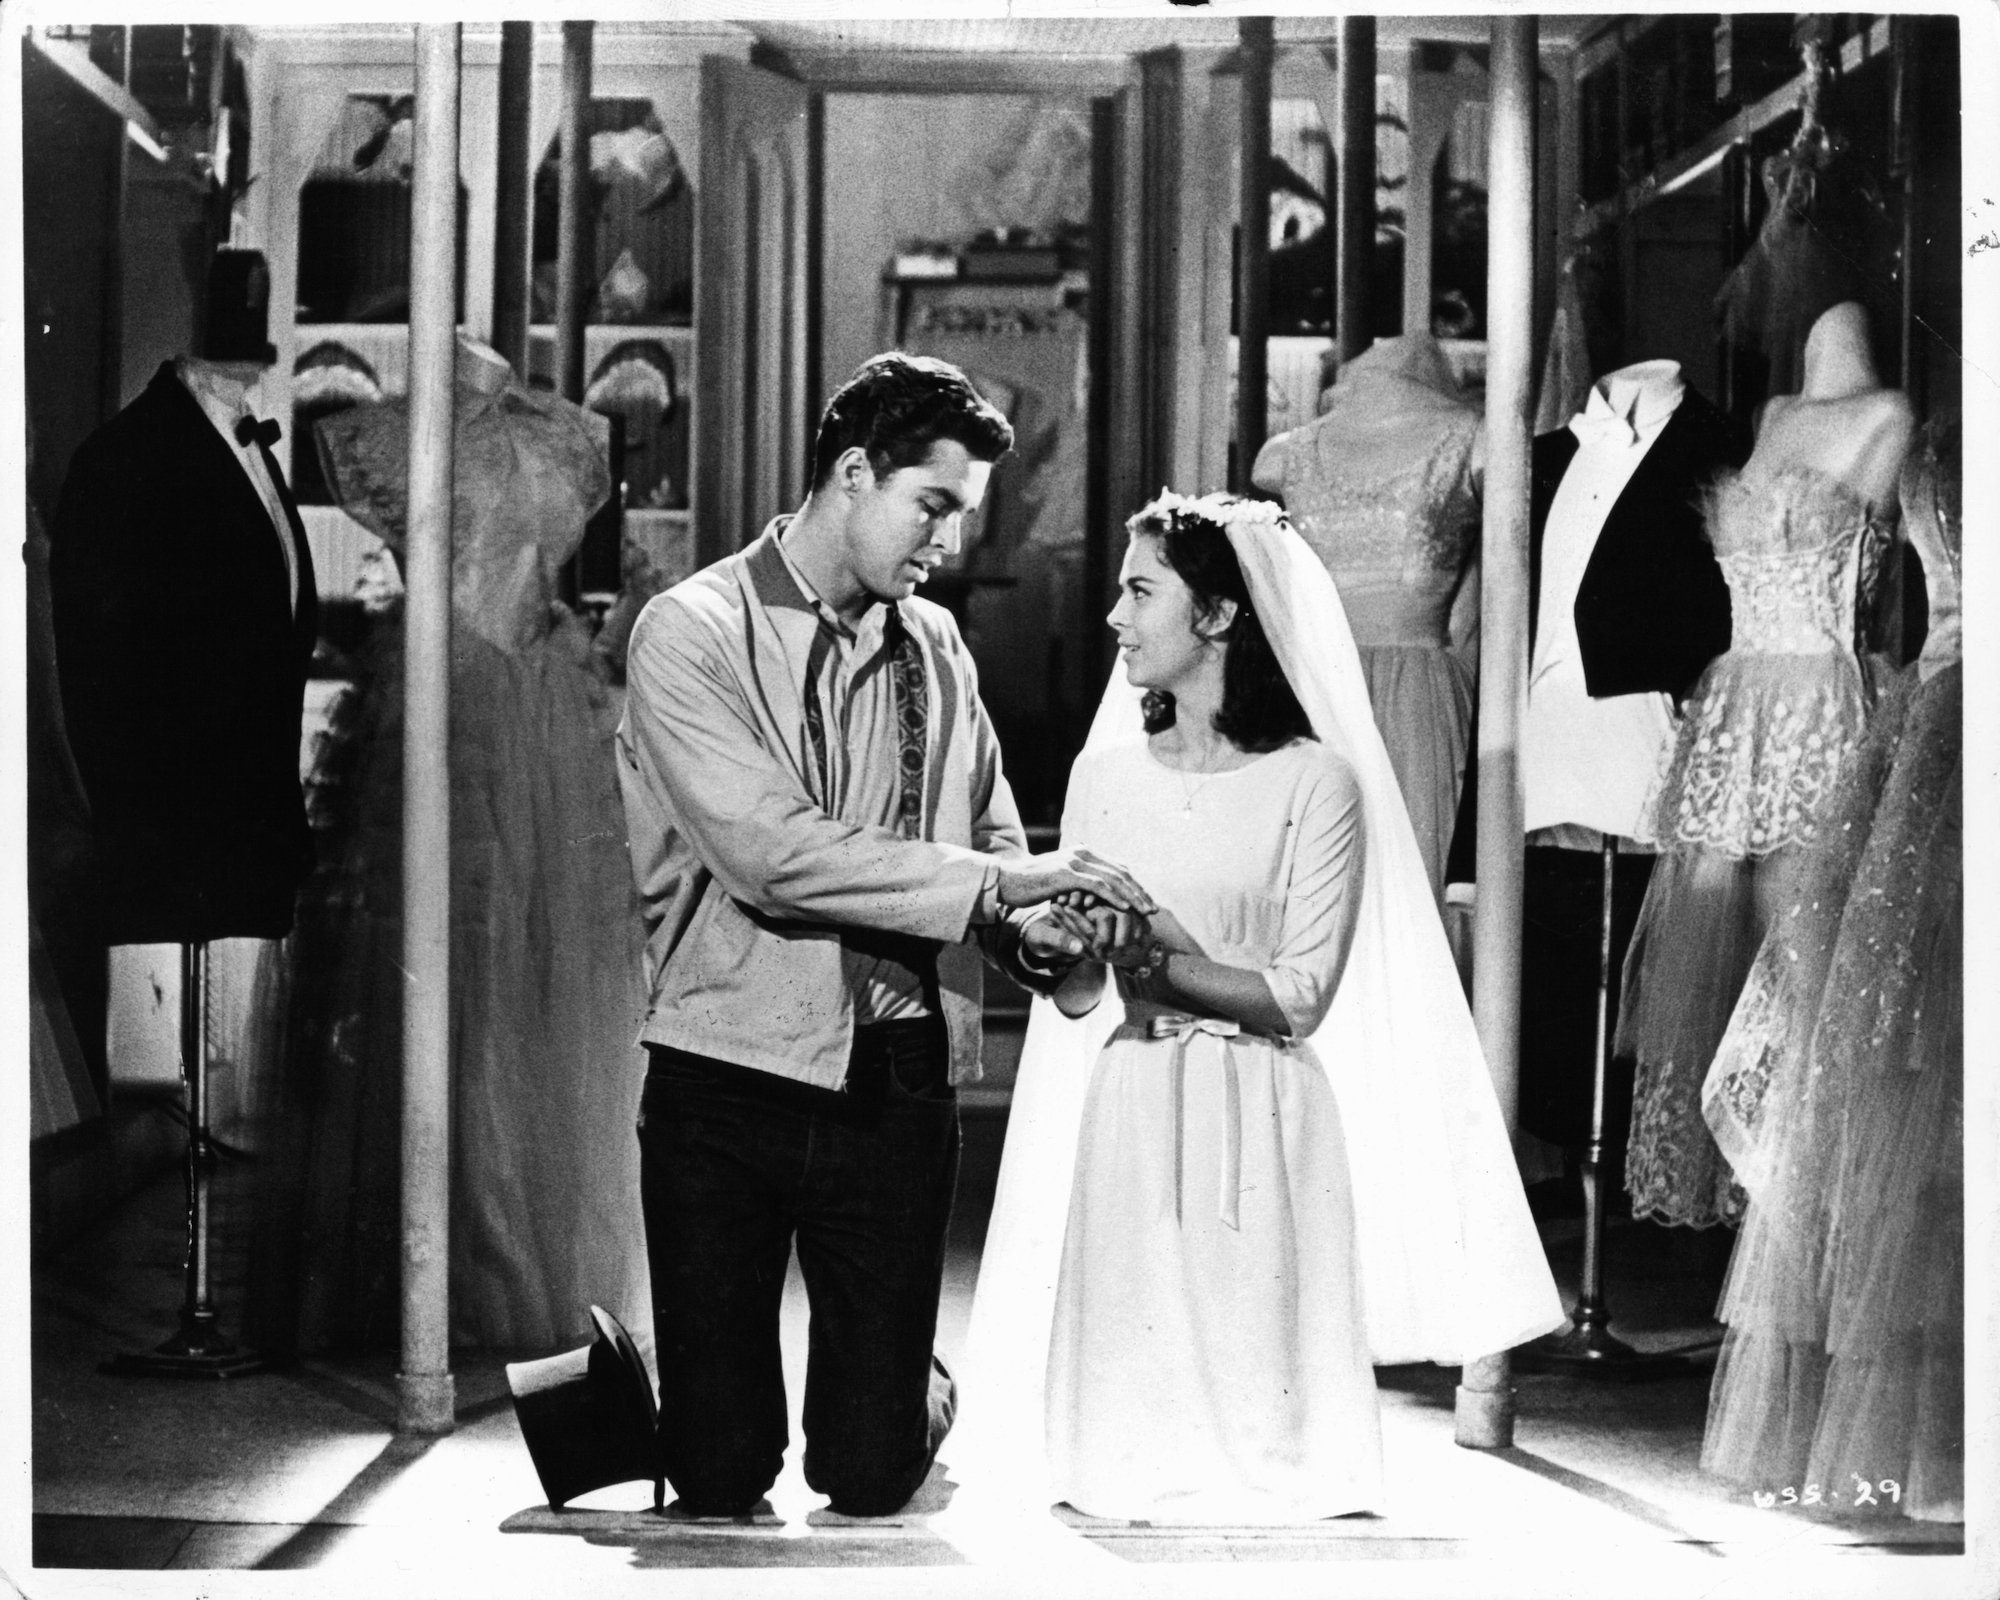 (L-R) Richard Beymer and Natalie Wood having romantic moment wardrobe shop in a scene from the film 'West Side Story',